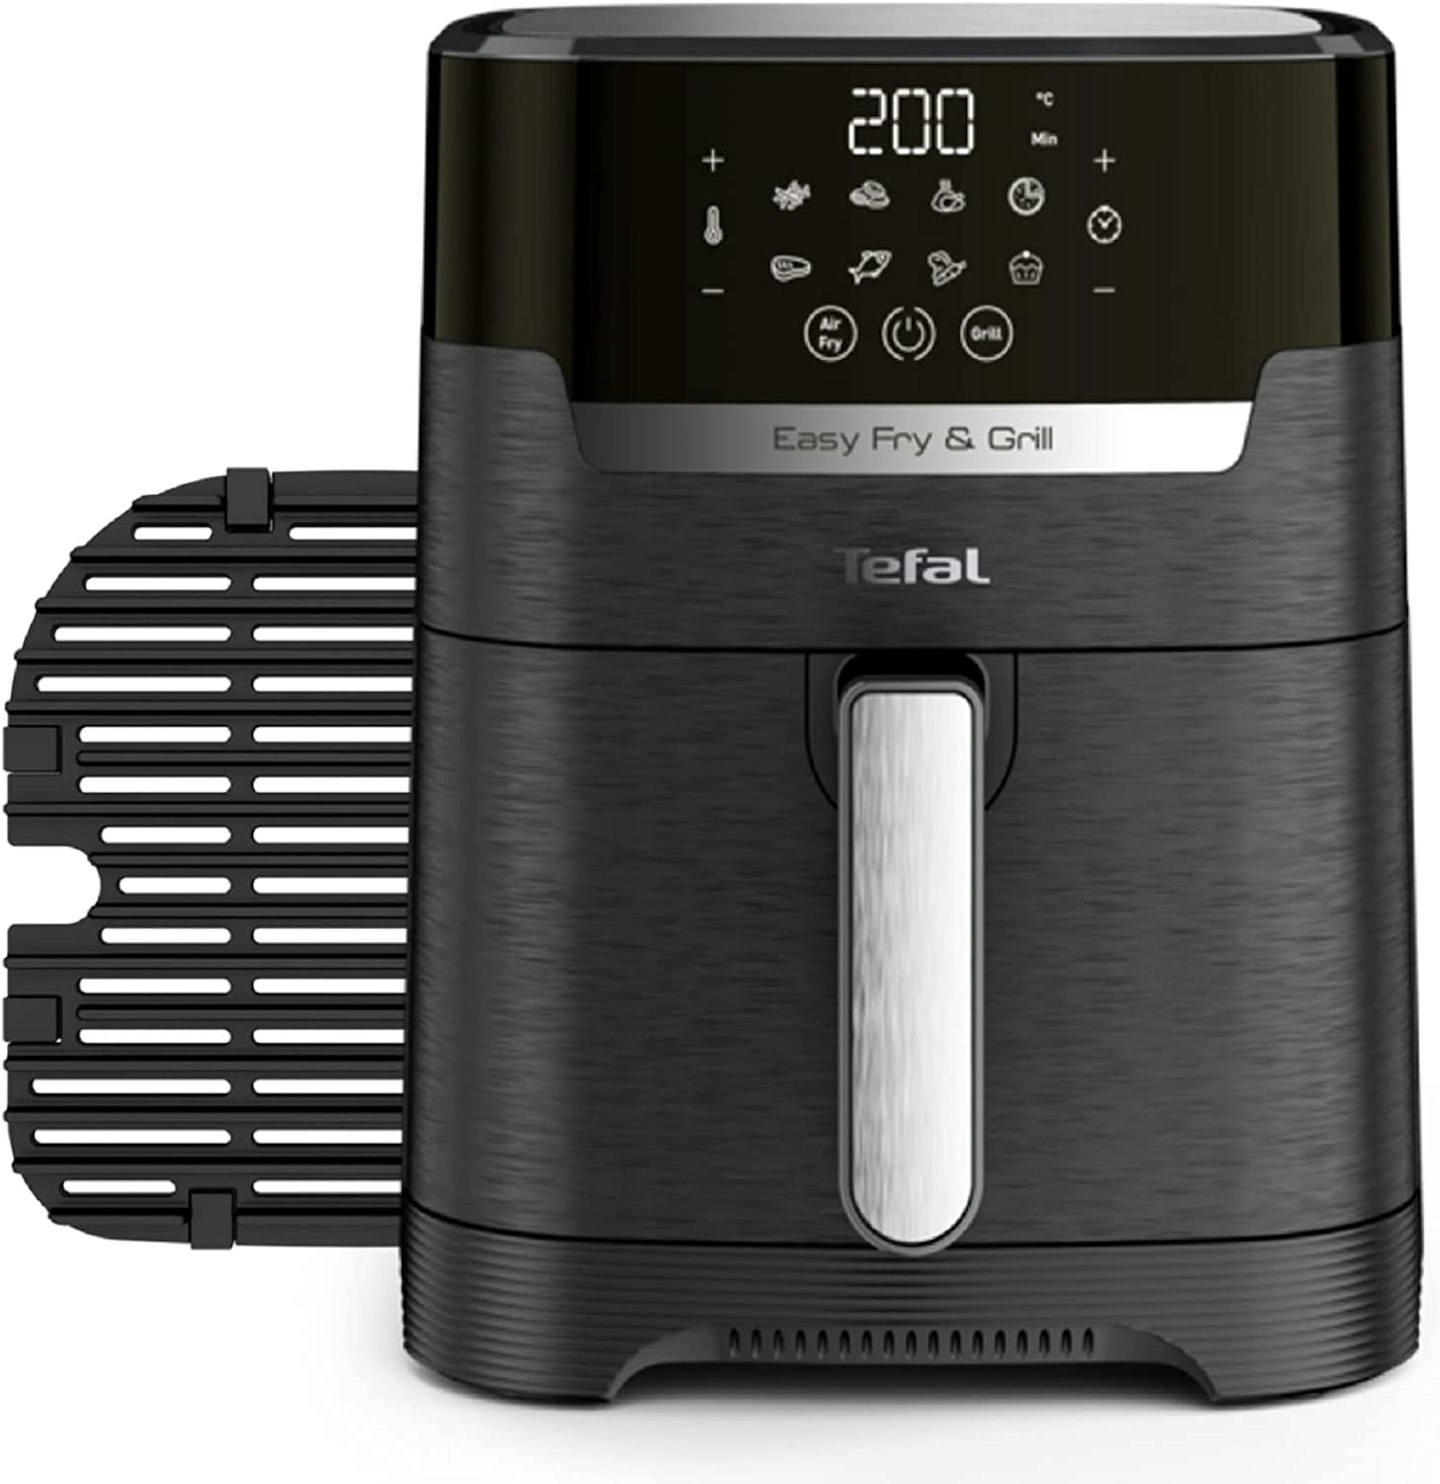 Tefal EasyFry Precision 2-in-1 Digital Air Fryer and Grill